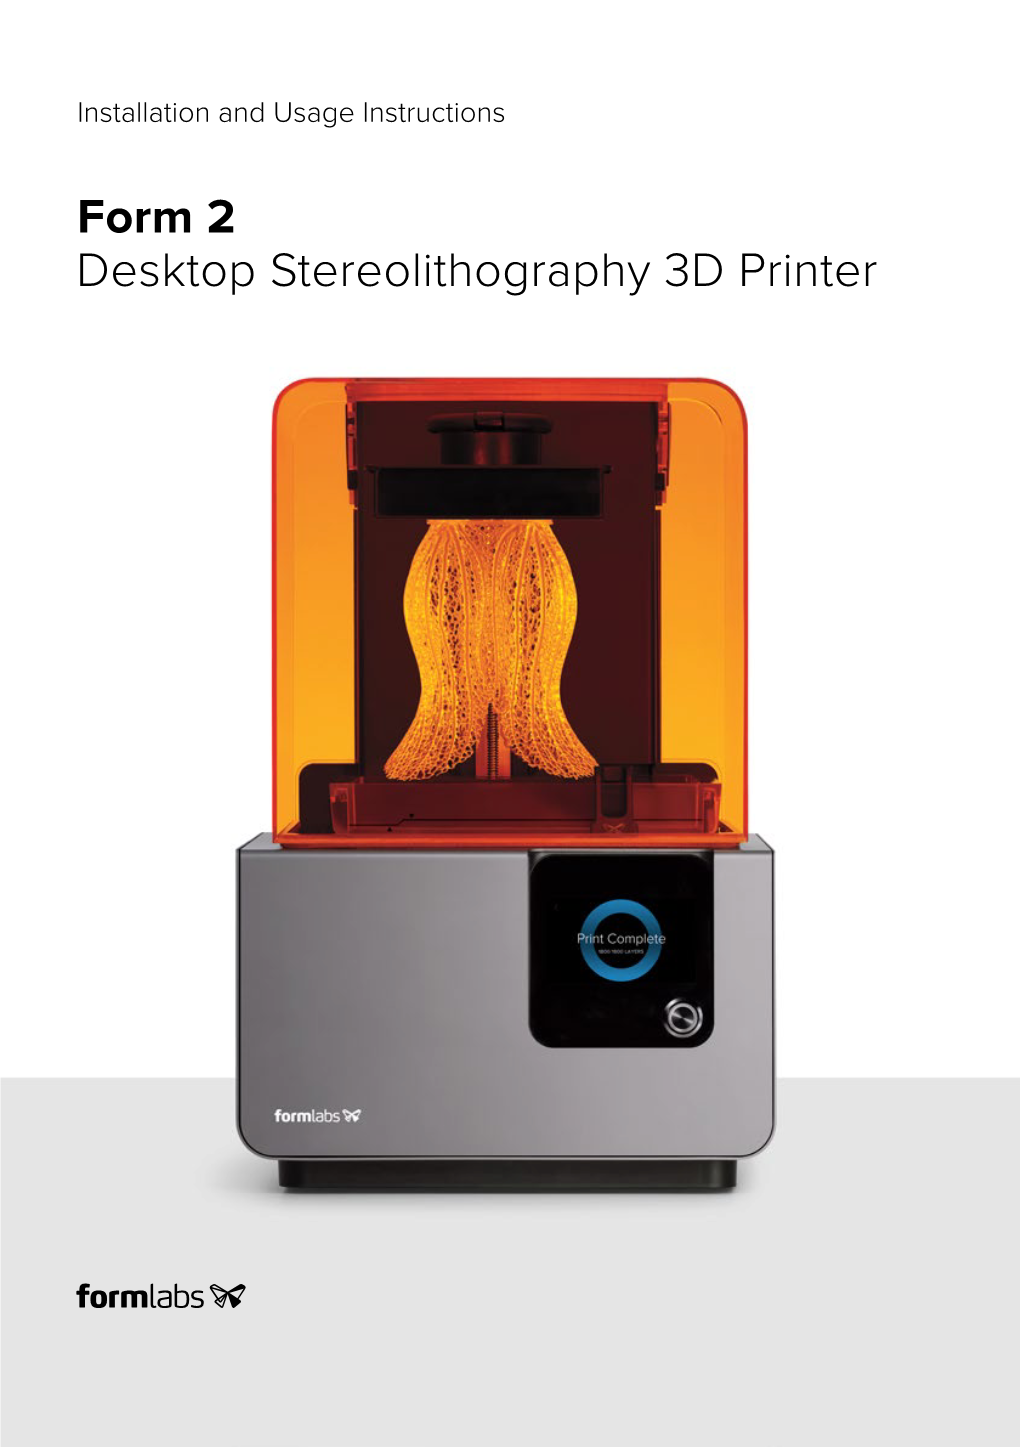 Form 2 Desktop Stereolithography 3D Printer Installation and Usage Instructions